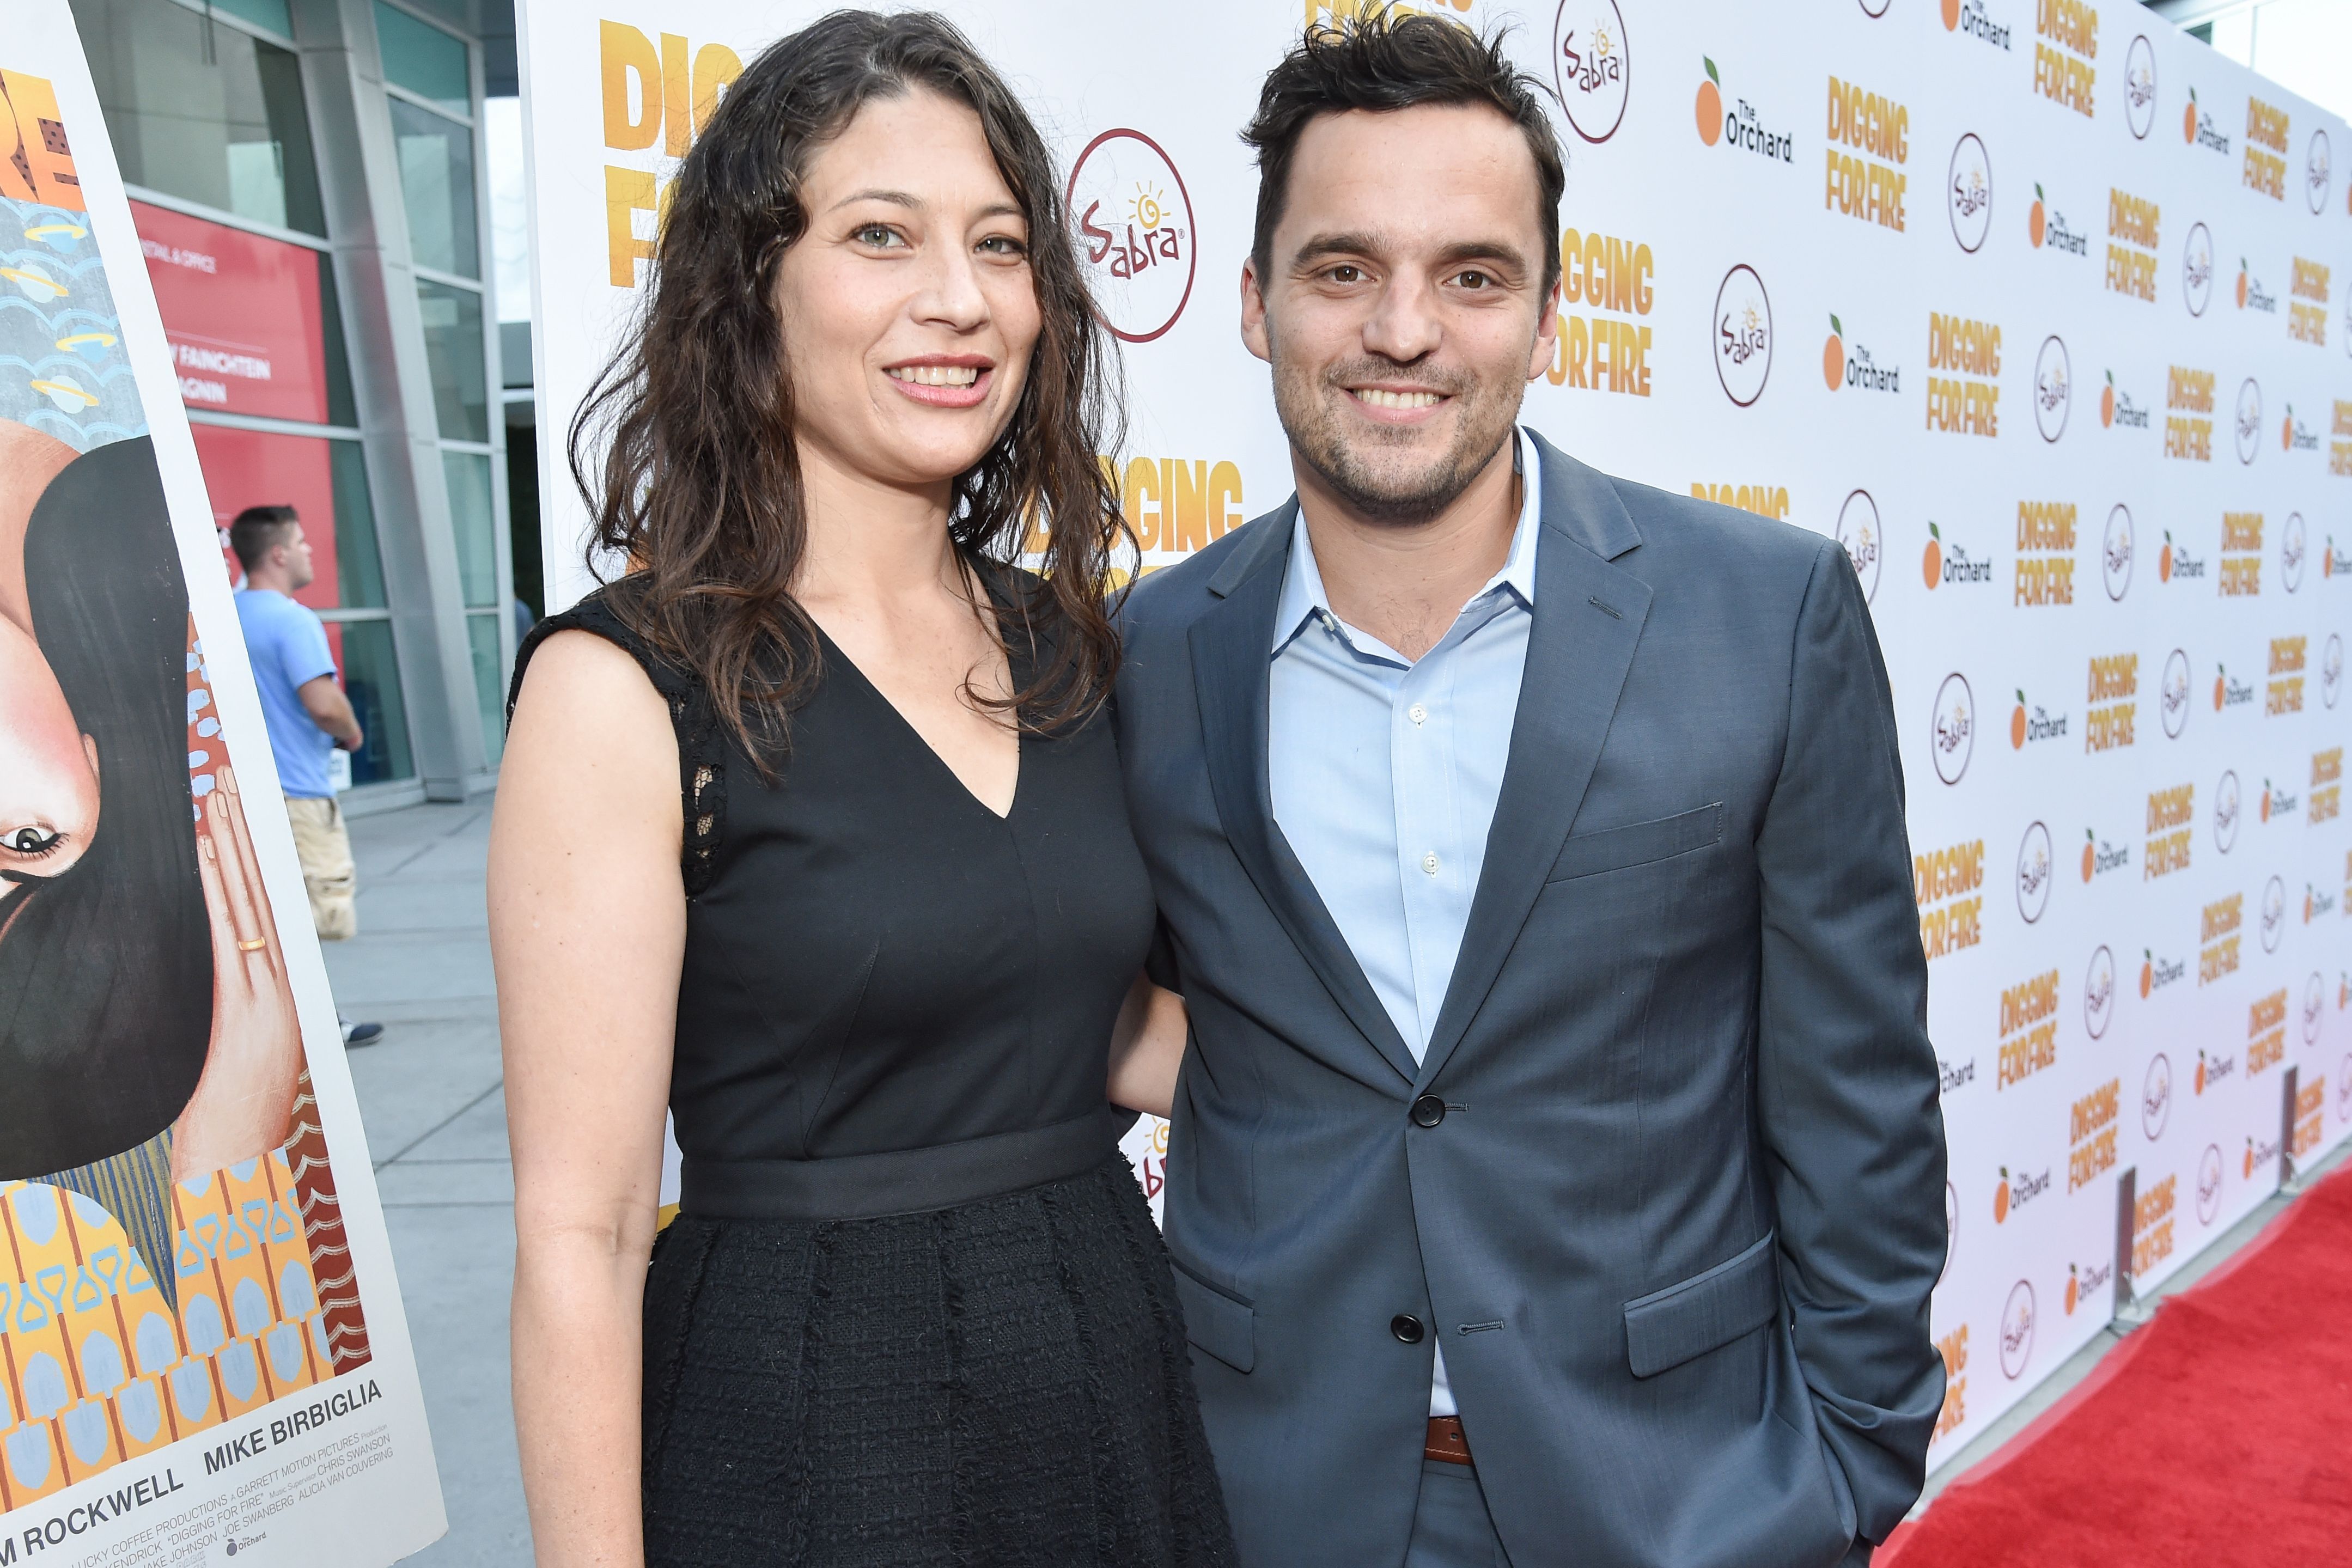 Jake Johnson and Erin Payne during the premiere of "Digging for Fire" on August 13, 2015, in Hollywood, California. | Source: Getty Images